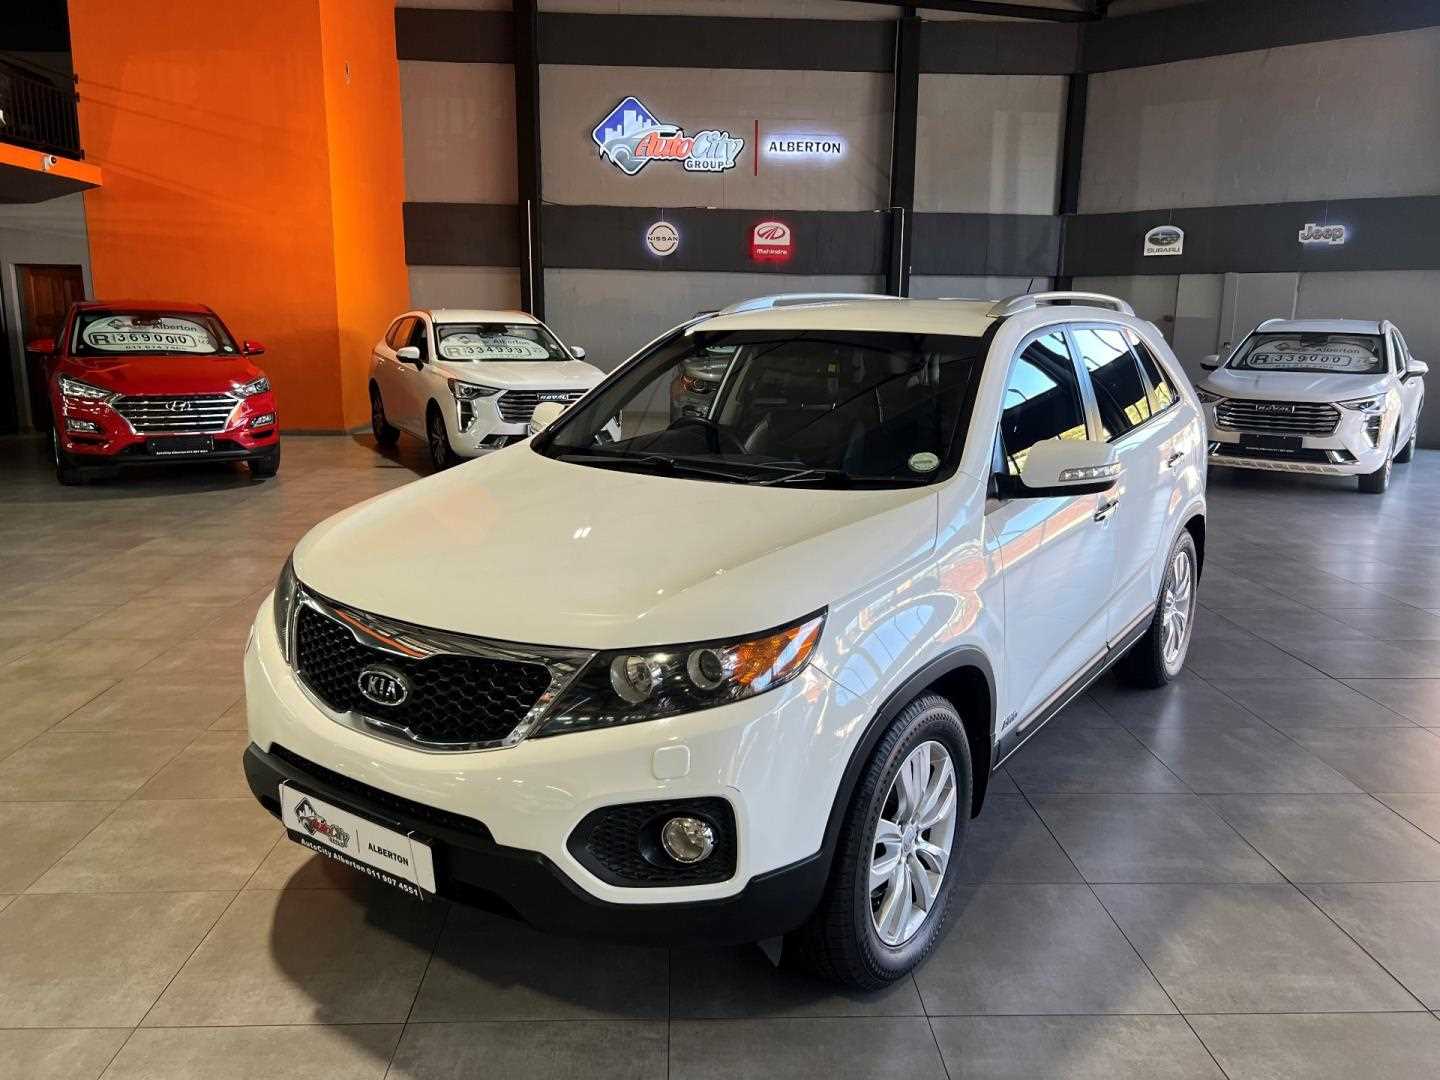 KIA SORENTO 2.2D 4X4 7 SEAT for Sale in South Africa